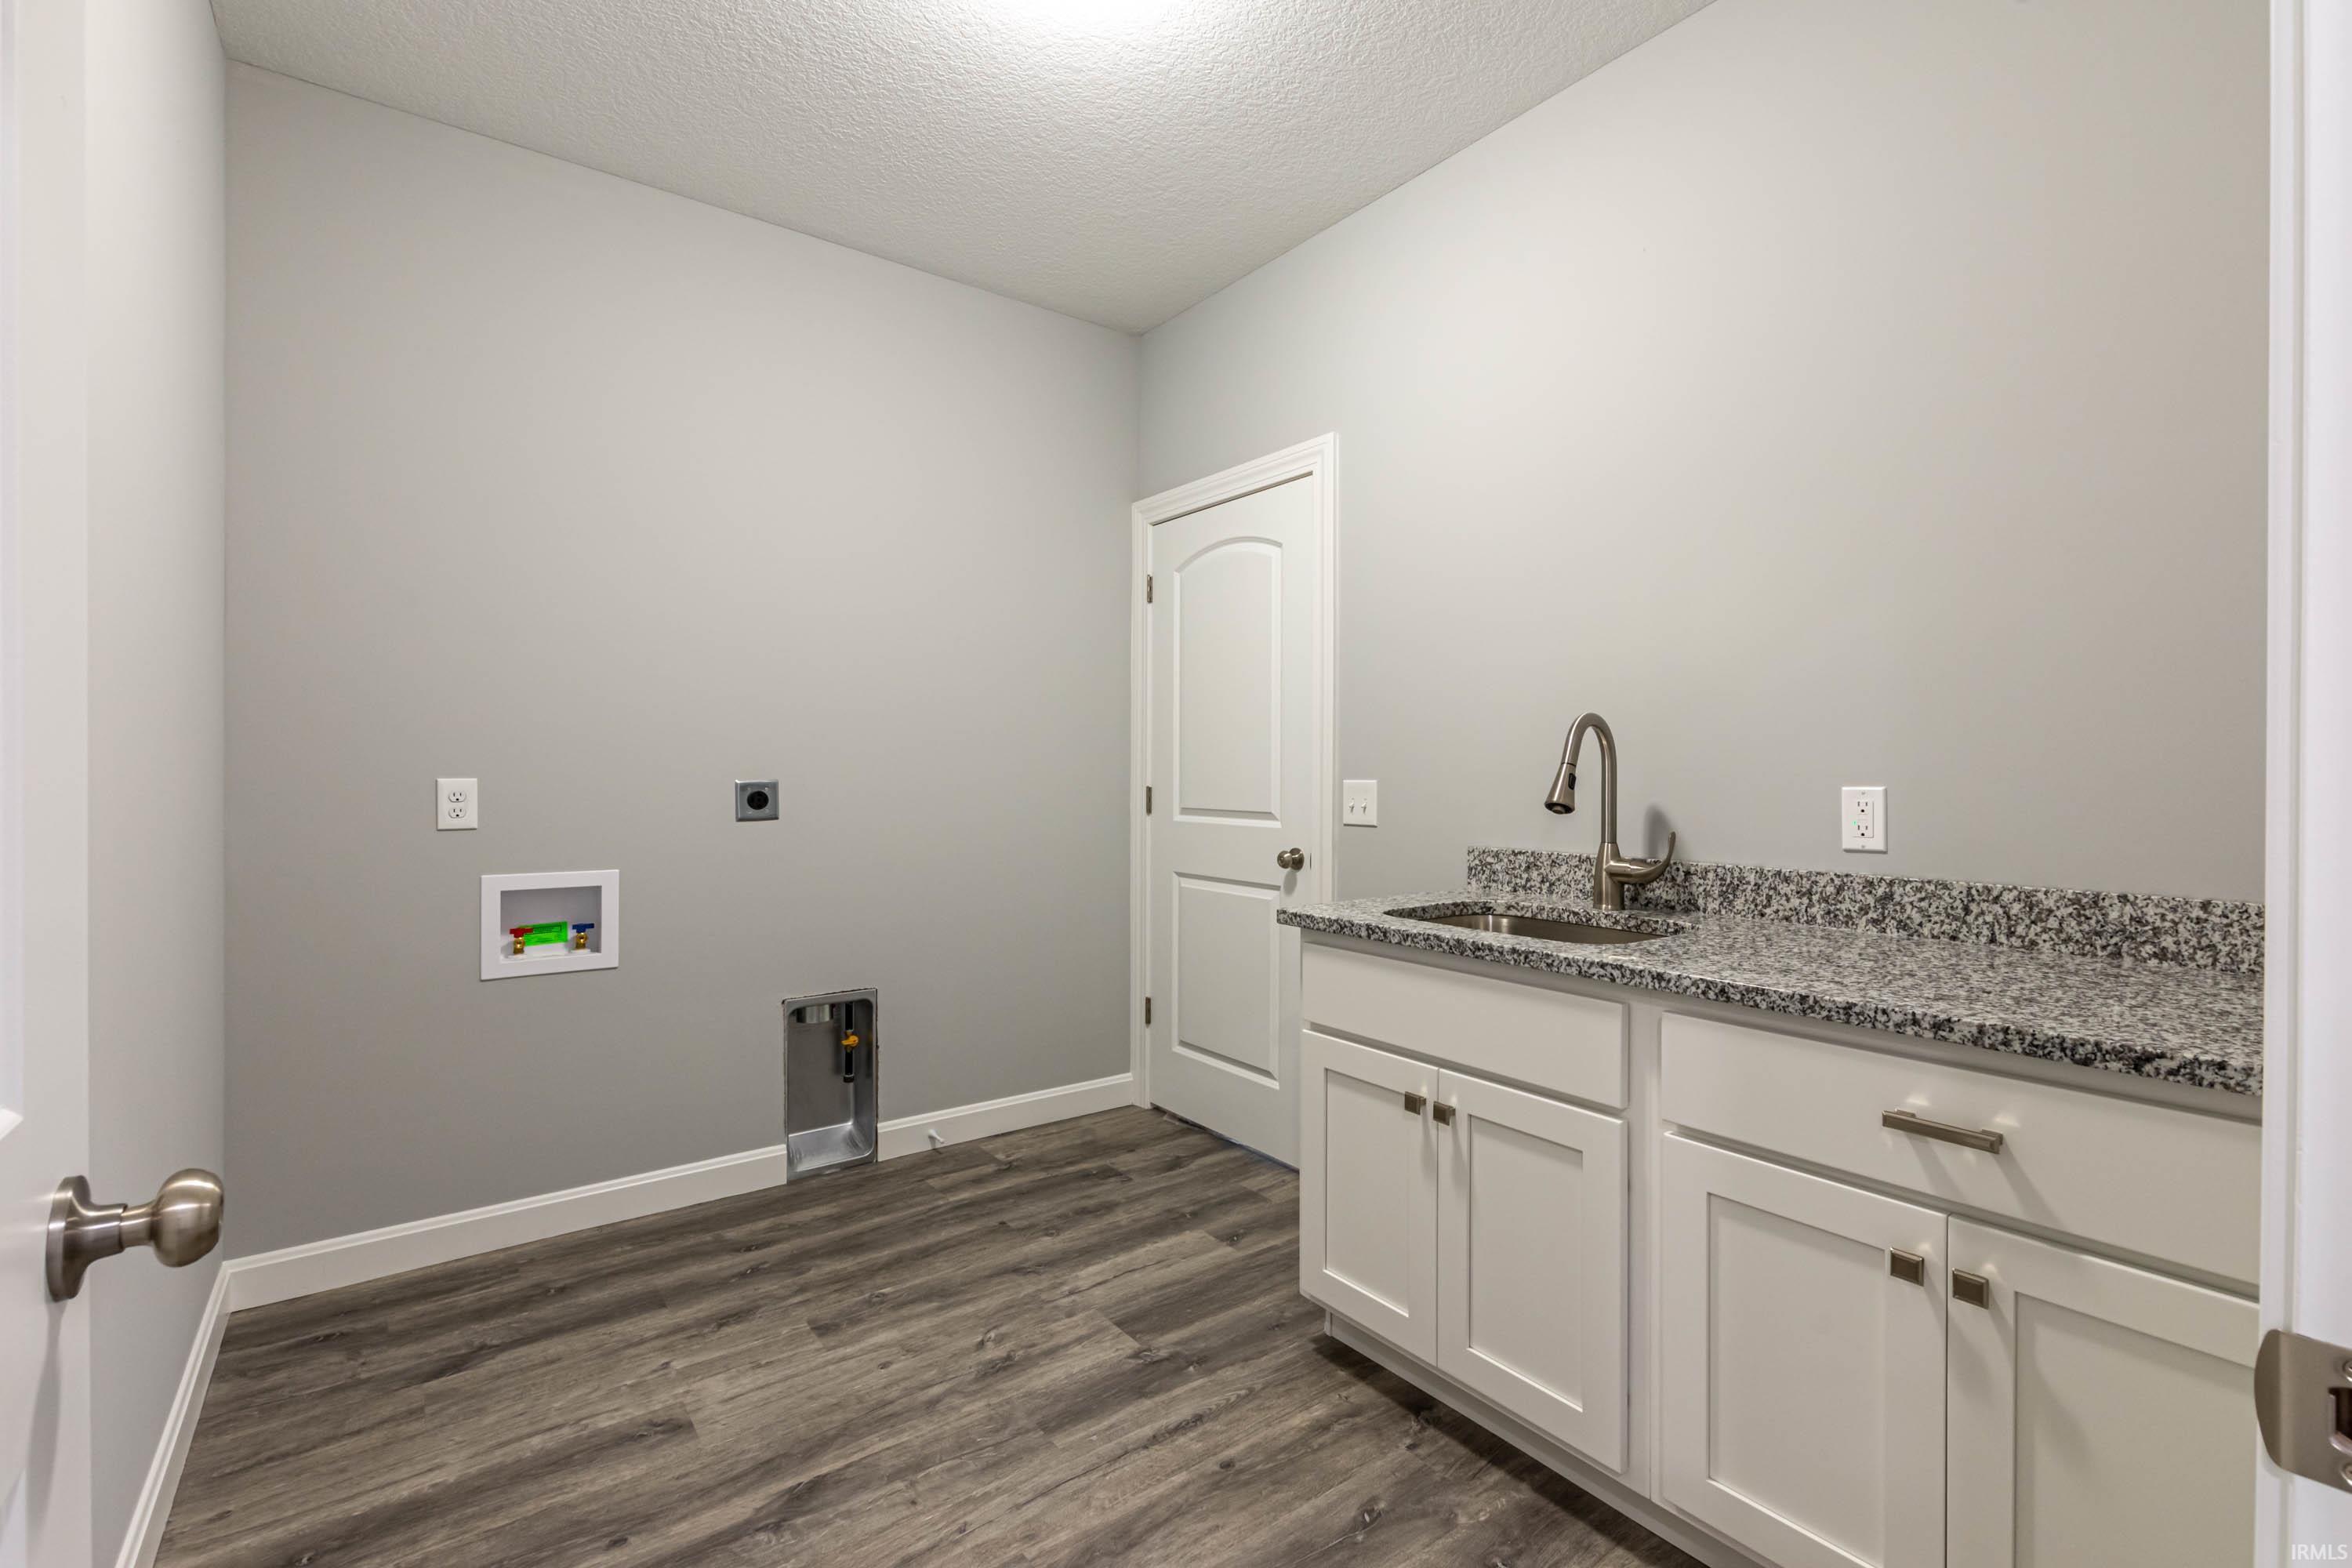 Accessible from Master Closet or Mud Room